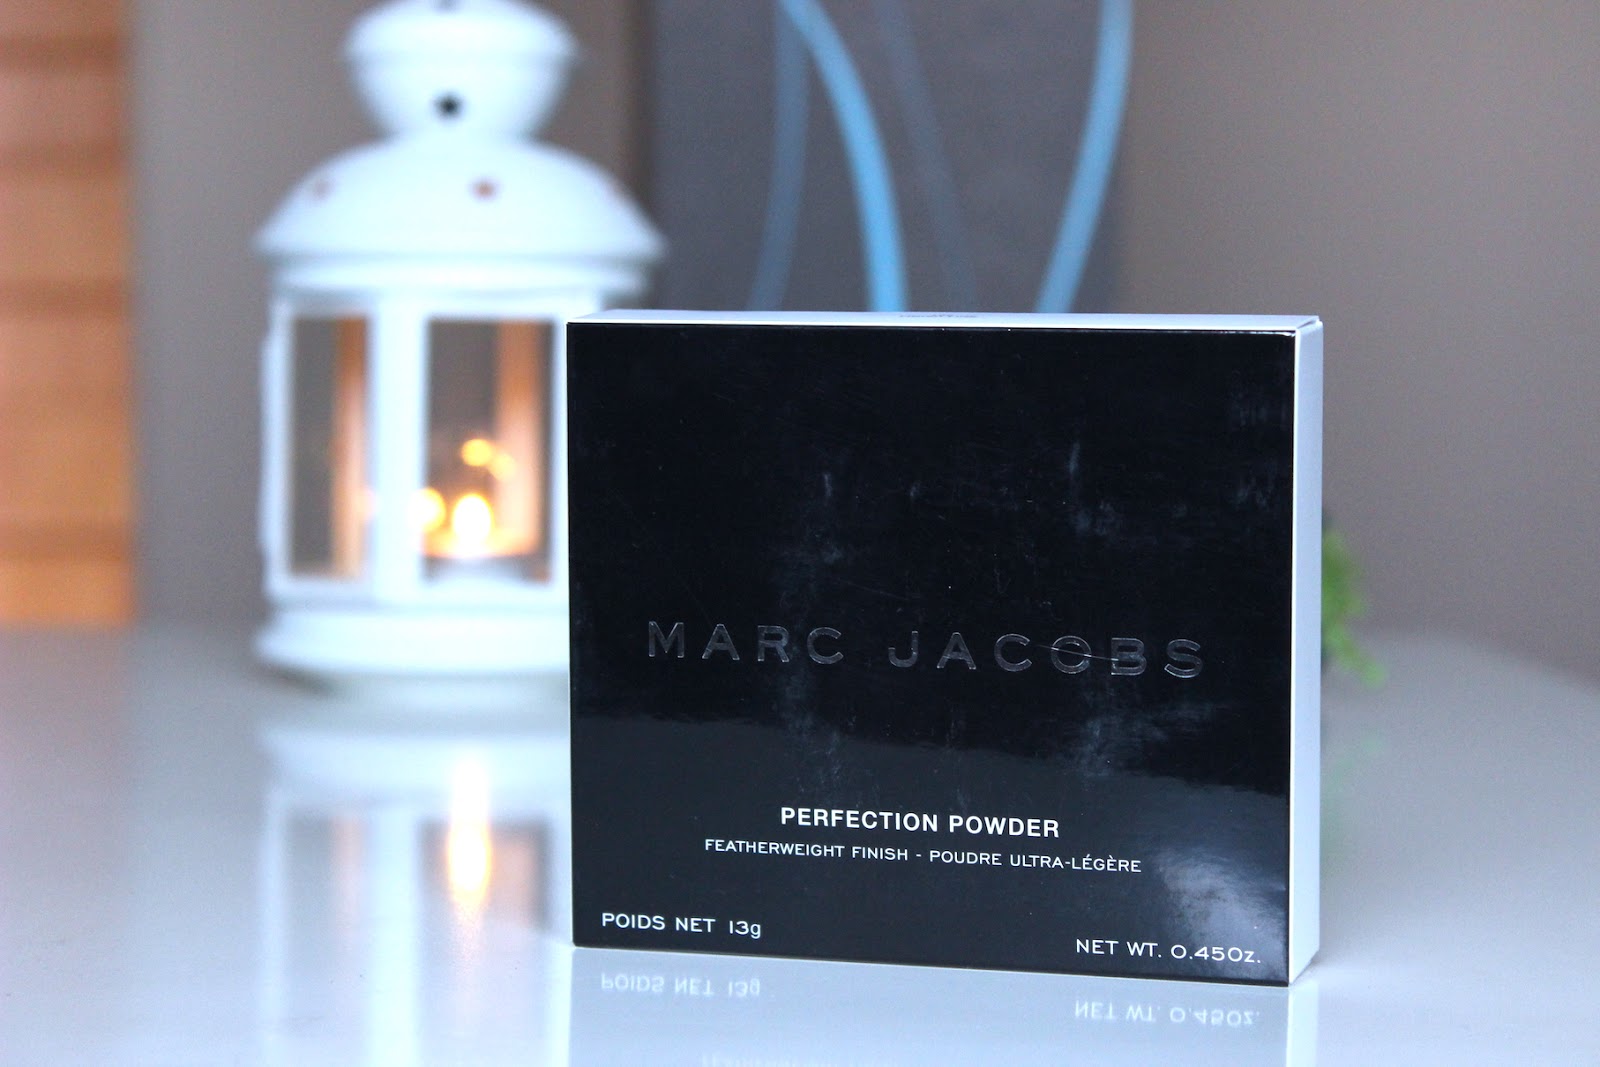 Perfection Powder // Marc Jacobs Beauty